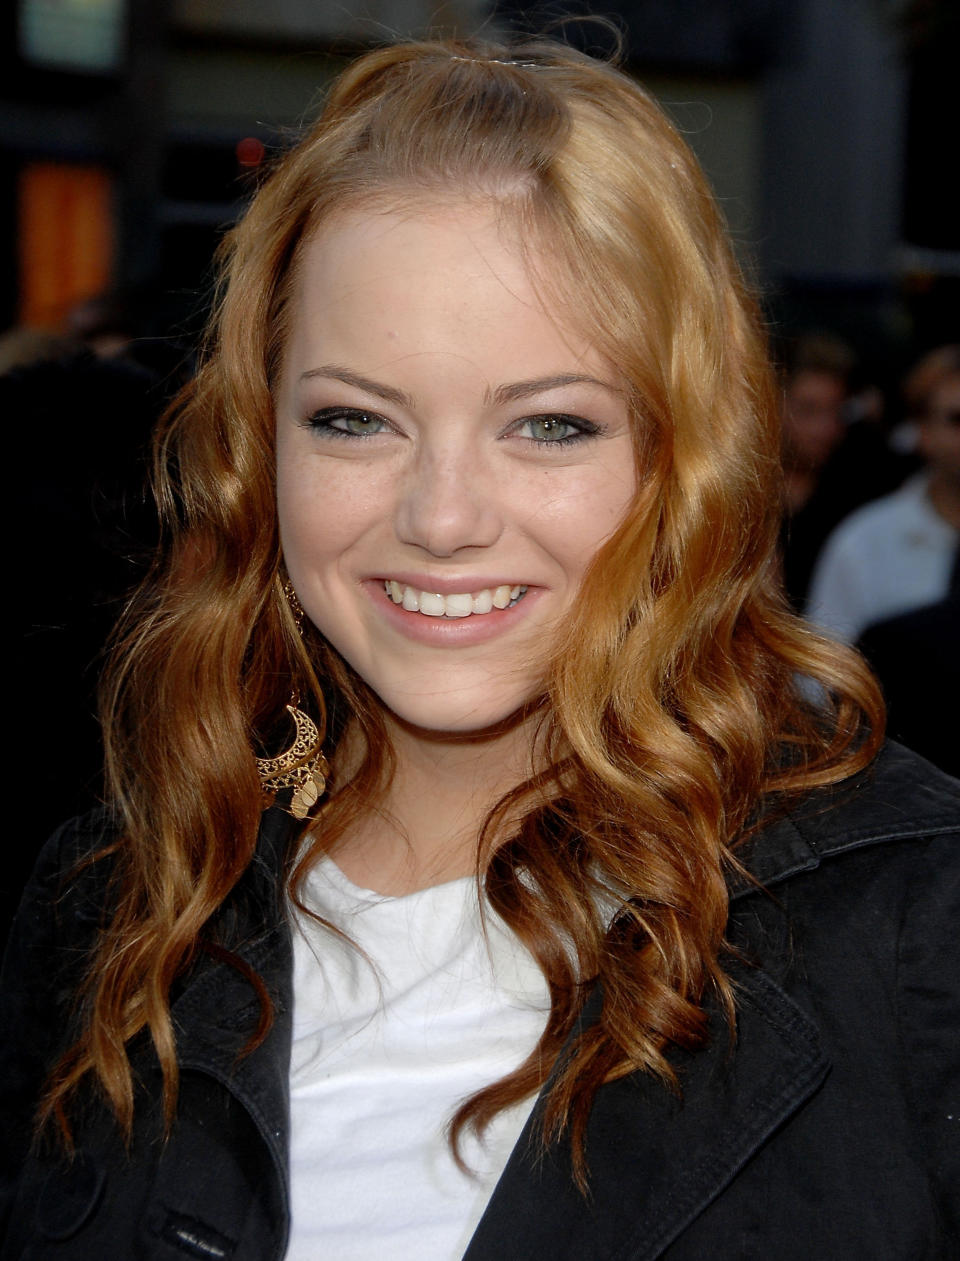 Emma Stone arrives at the 'I Now Pronounce You Chuck and Larry' premiere in 2007&nbsp;in Universal City, California.